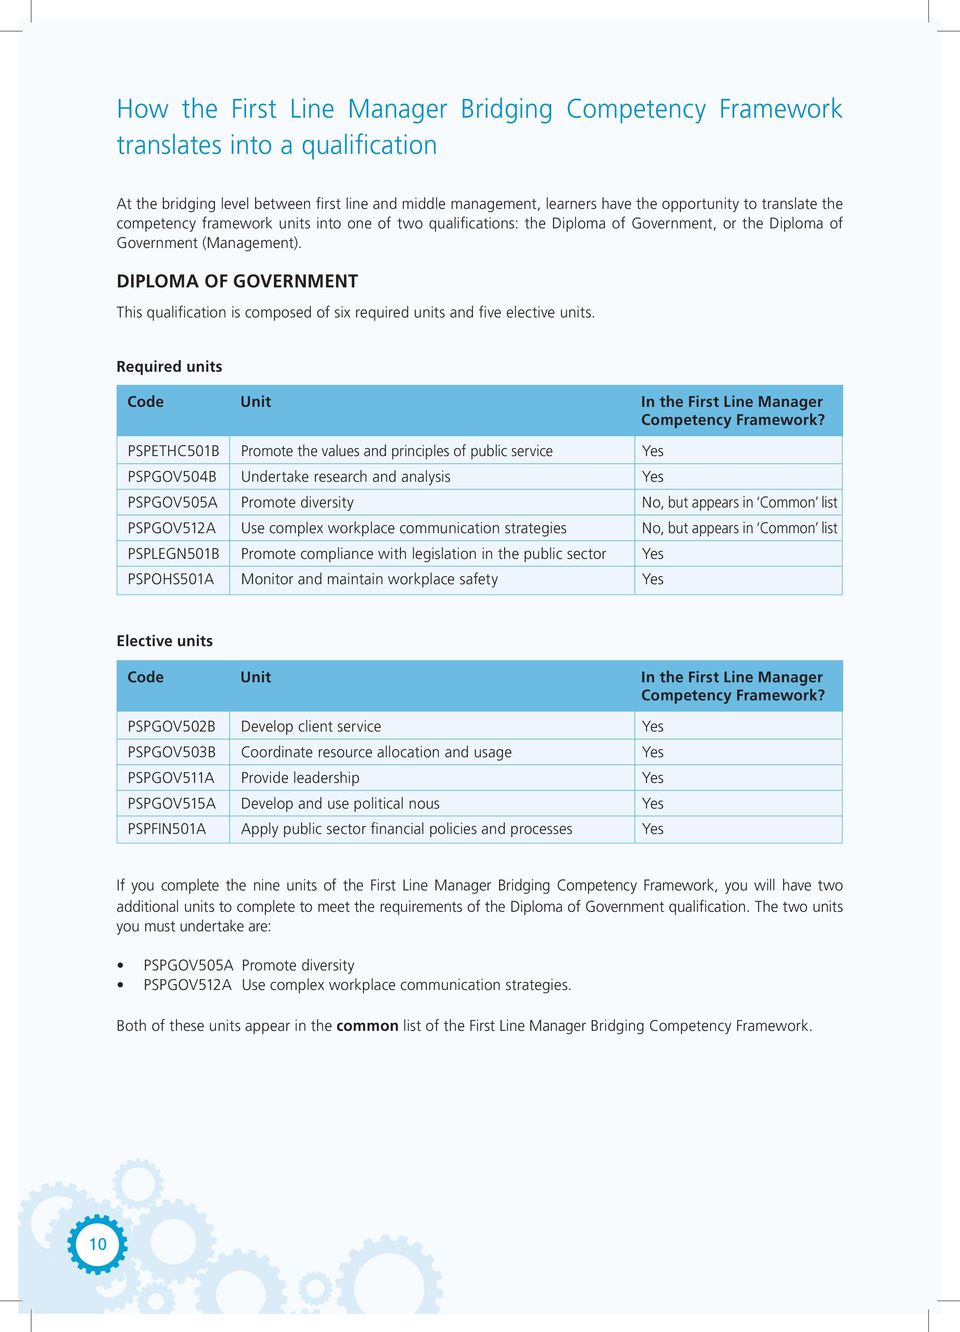 DIPLOMA OF GOVERNMENT This qualification is composed of six required units and five elective units.